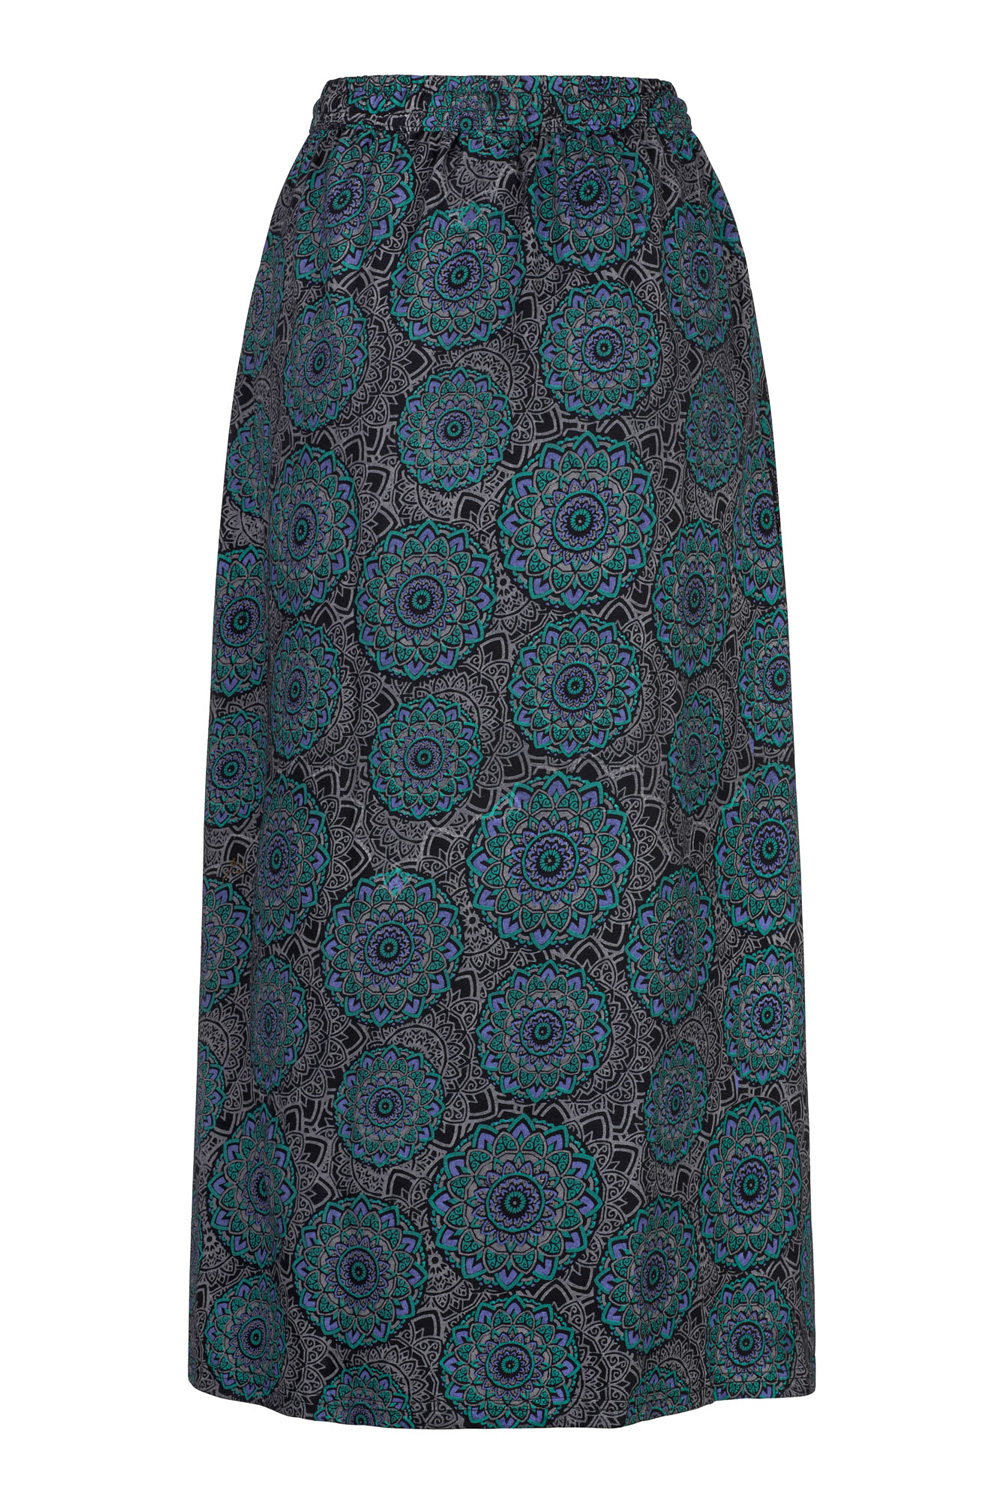 Wicked Dragon Clothing - Mandala flower long skirt with pockets